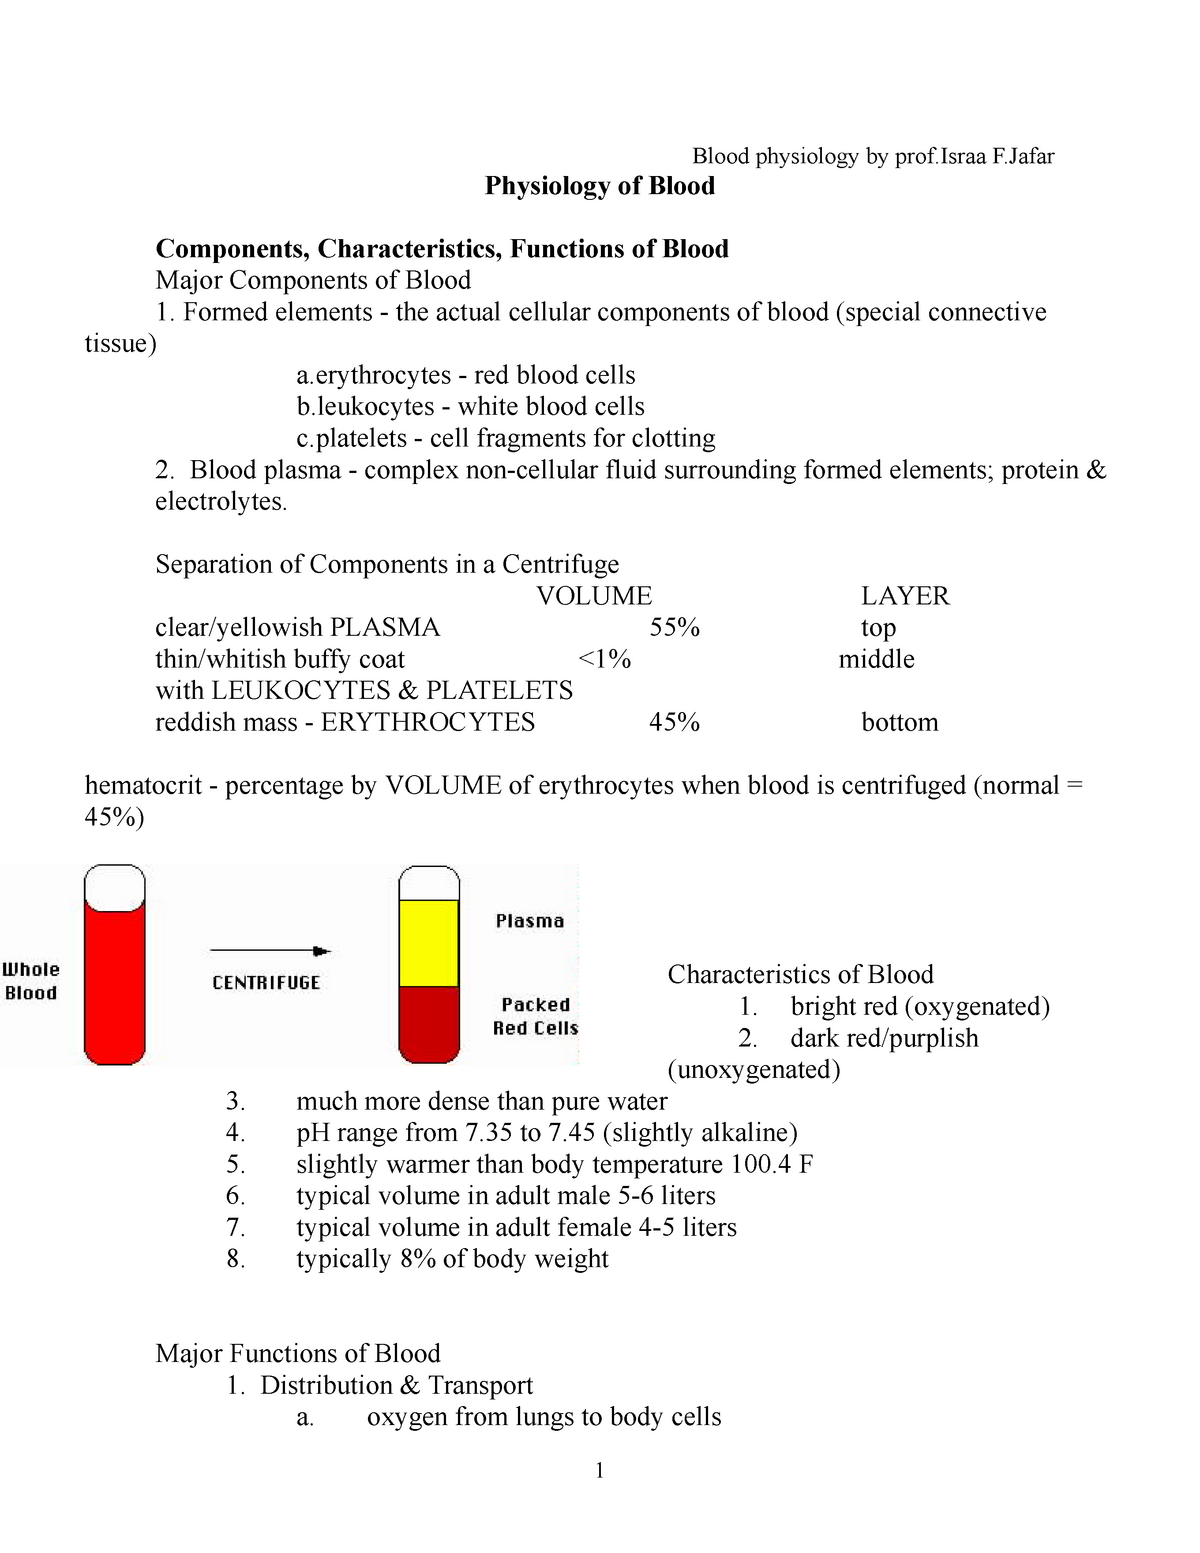 essay questions on blood physiology